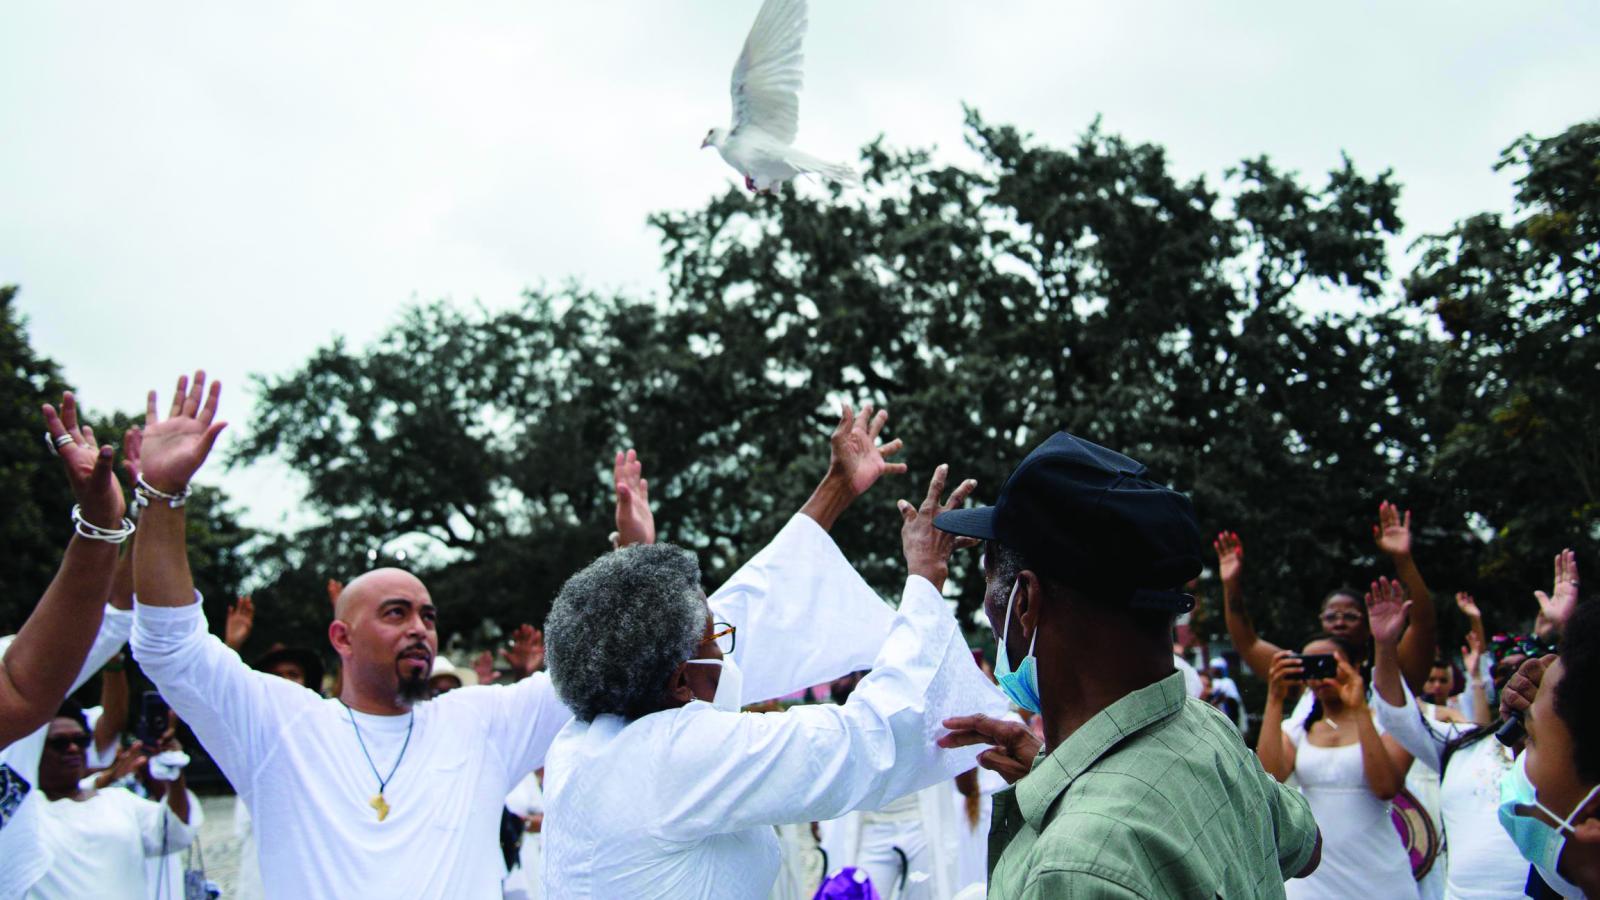 A group of Black people dressed in white release doves into the air in an outside environment. 